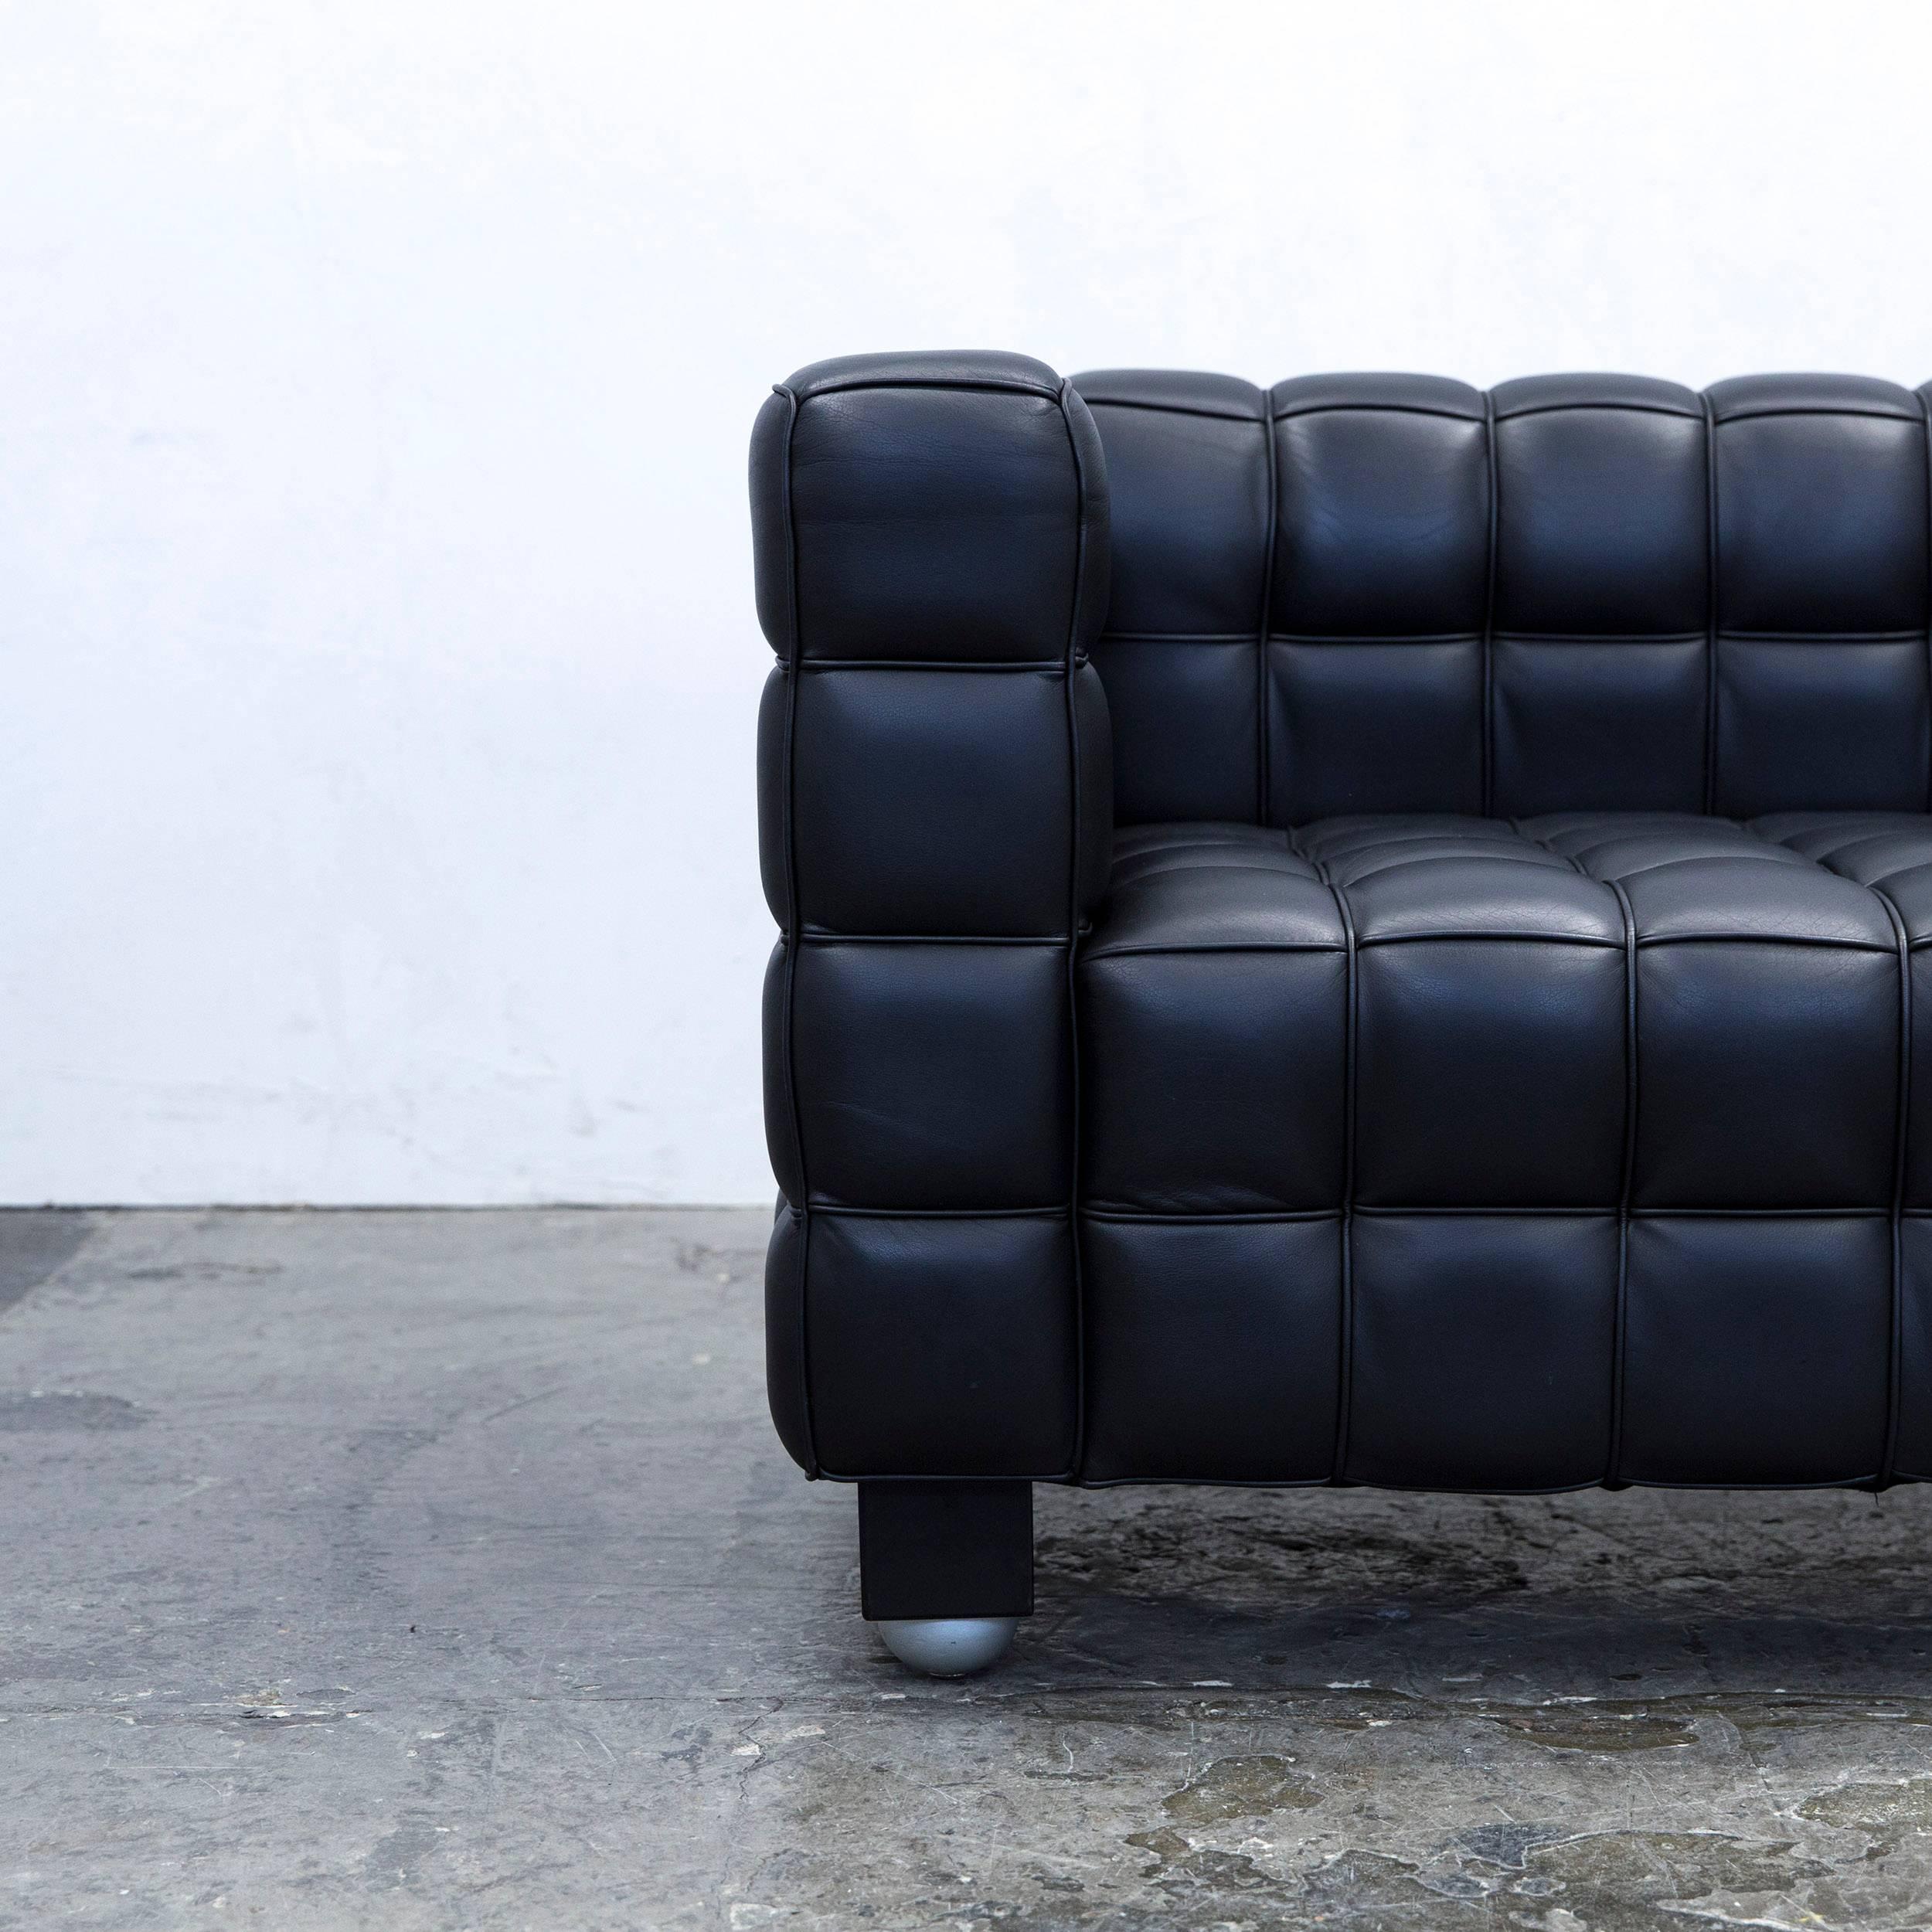 Black colored original Wittmann Kubus designer leather sofa in a minimalistic and modern design, made for pure comfort and style.